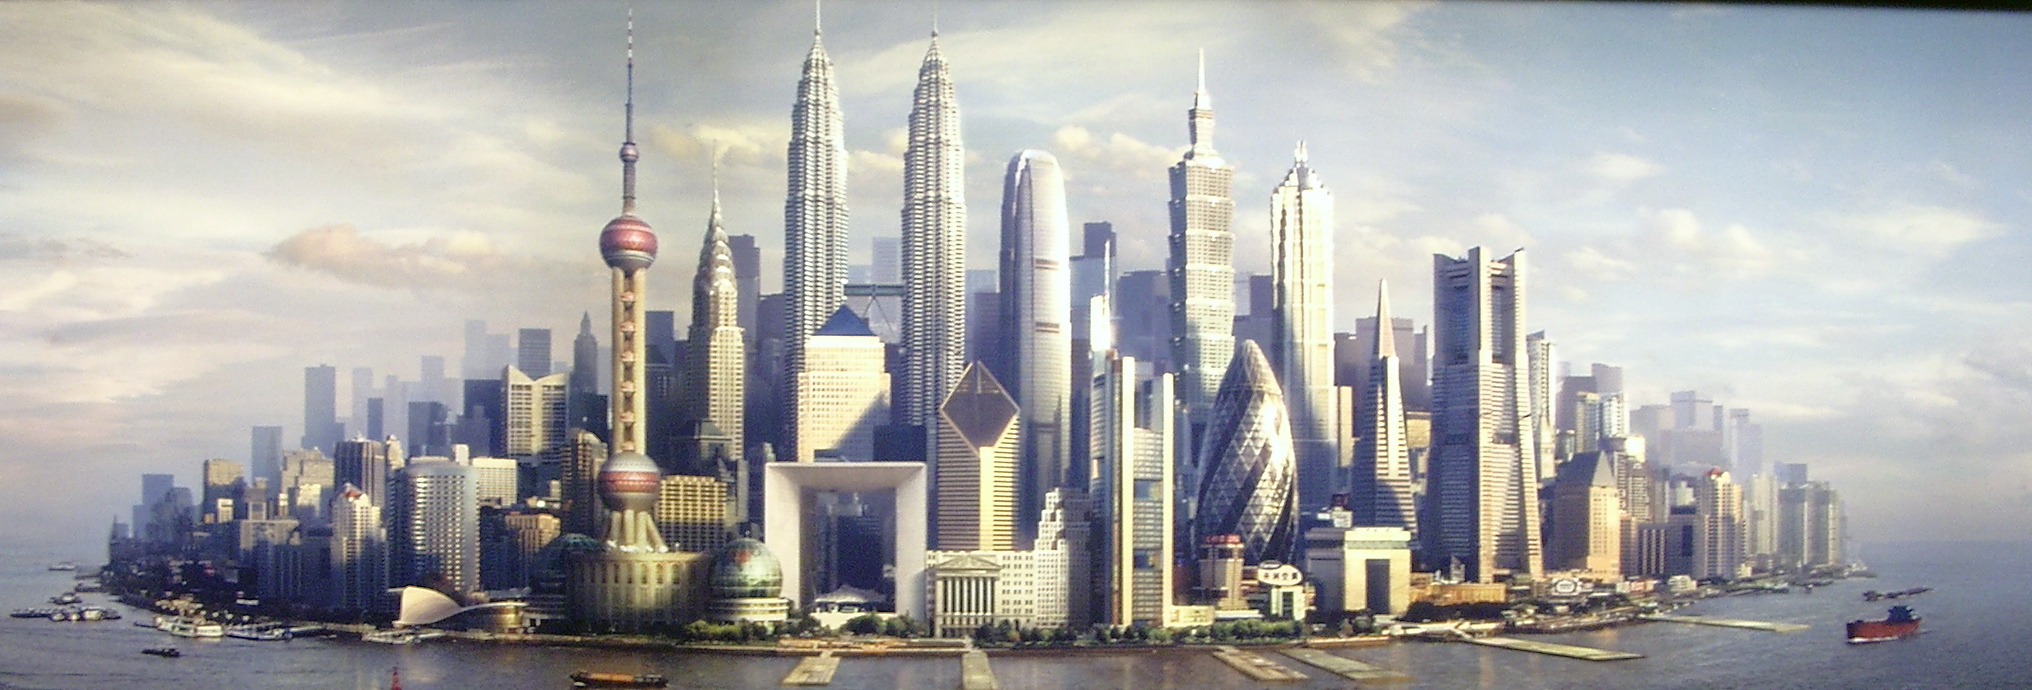 Financial Times Skyscrapers Poster Advertisement